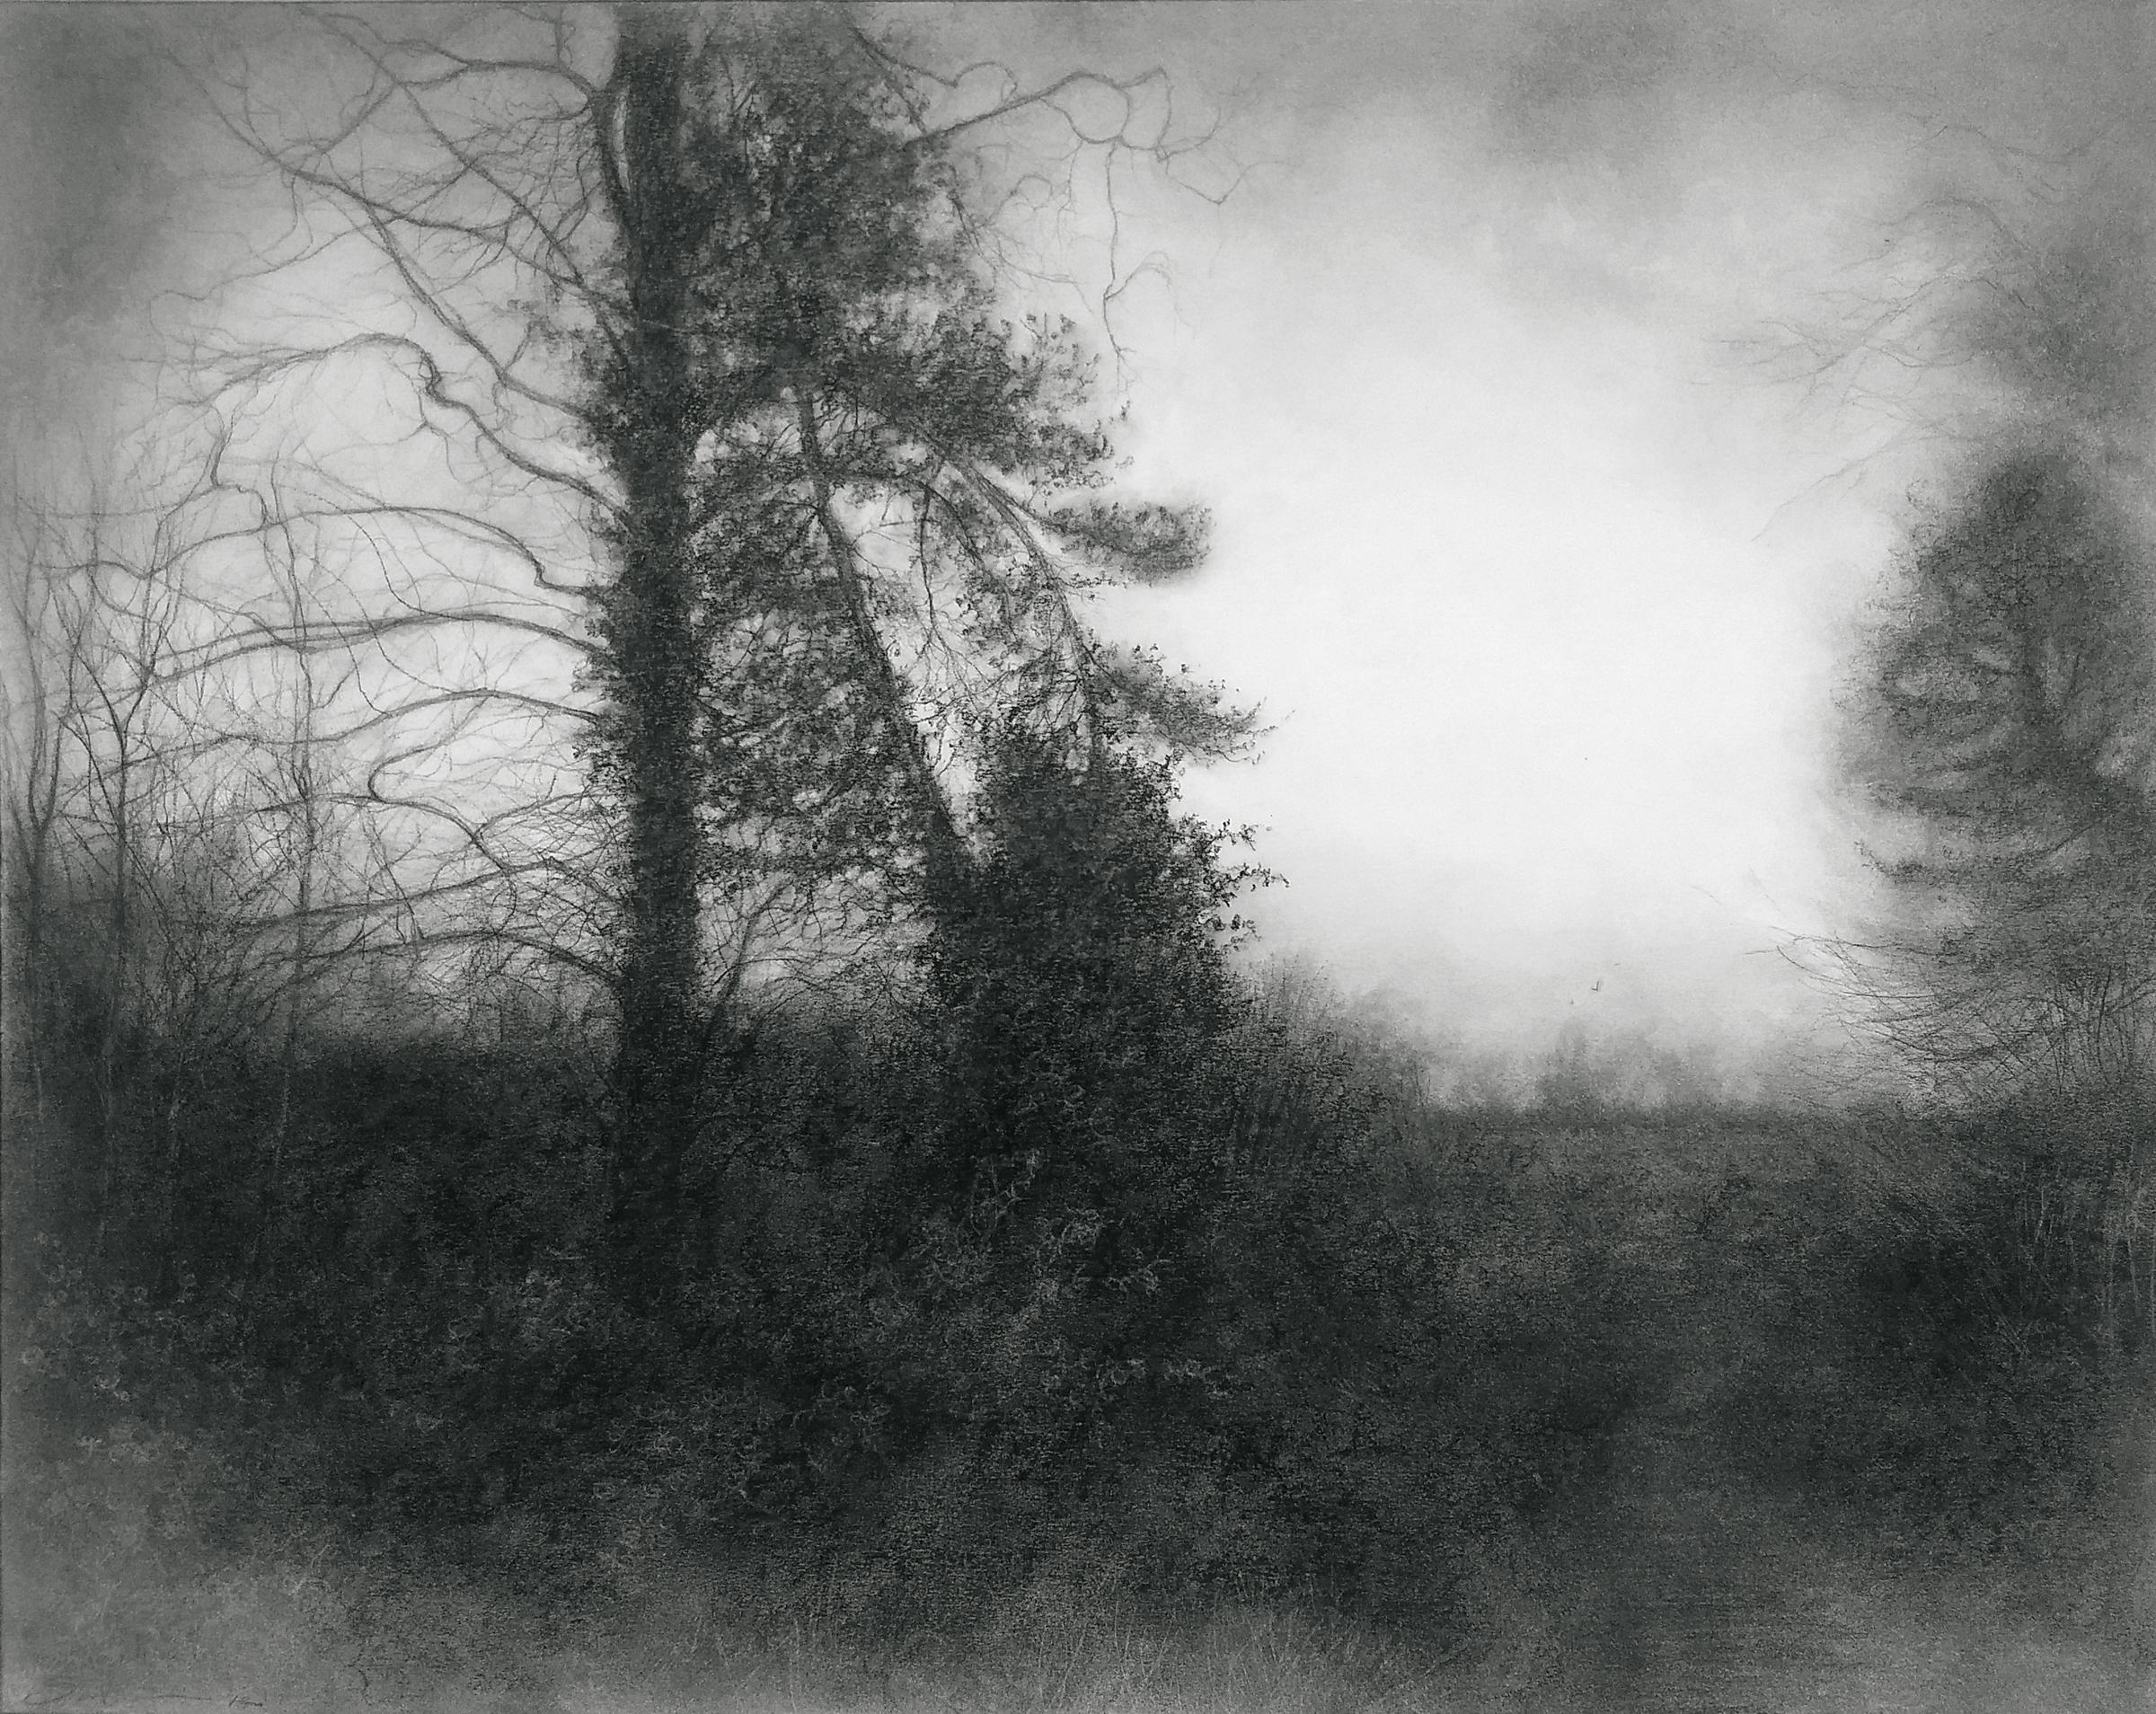 Sue Bryan Landscape Art - A Way Through (Black & White Charcoal Drawing of Misty Landscape w Spruce Tree)